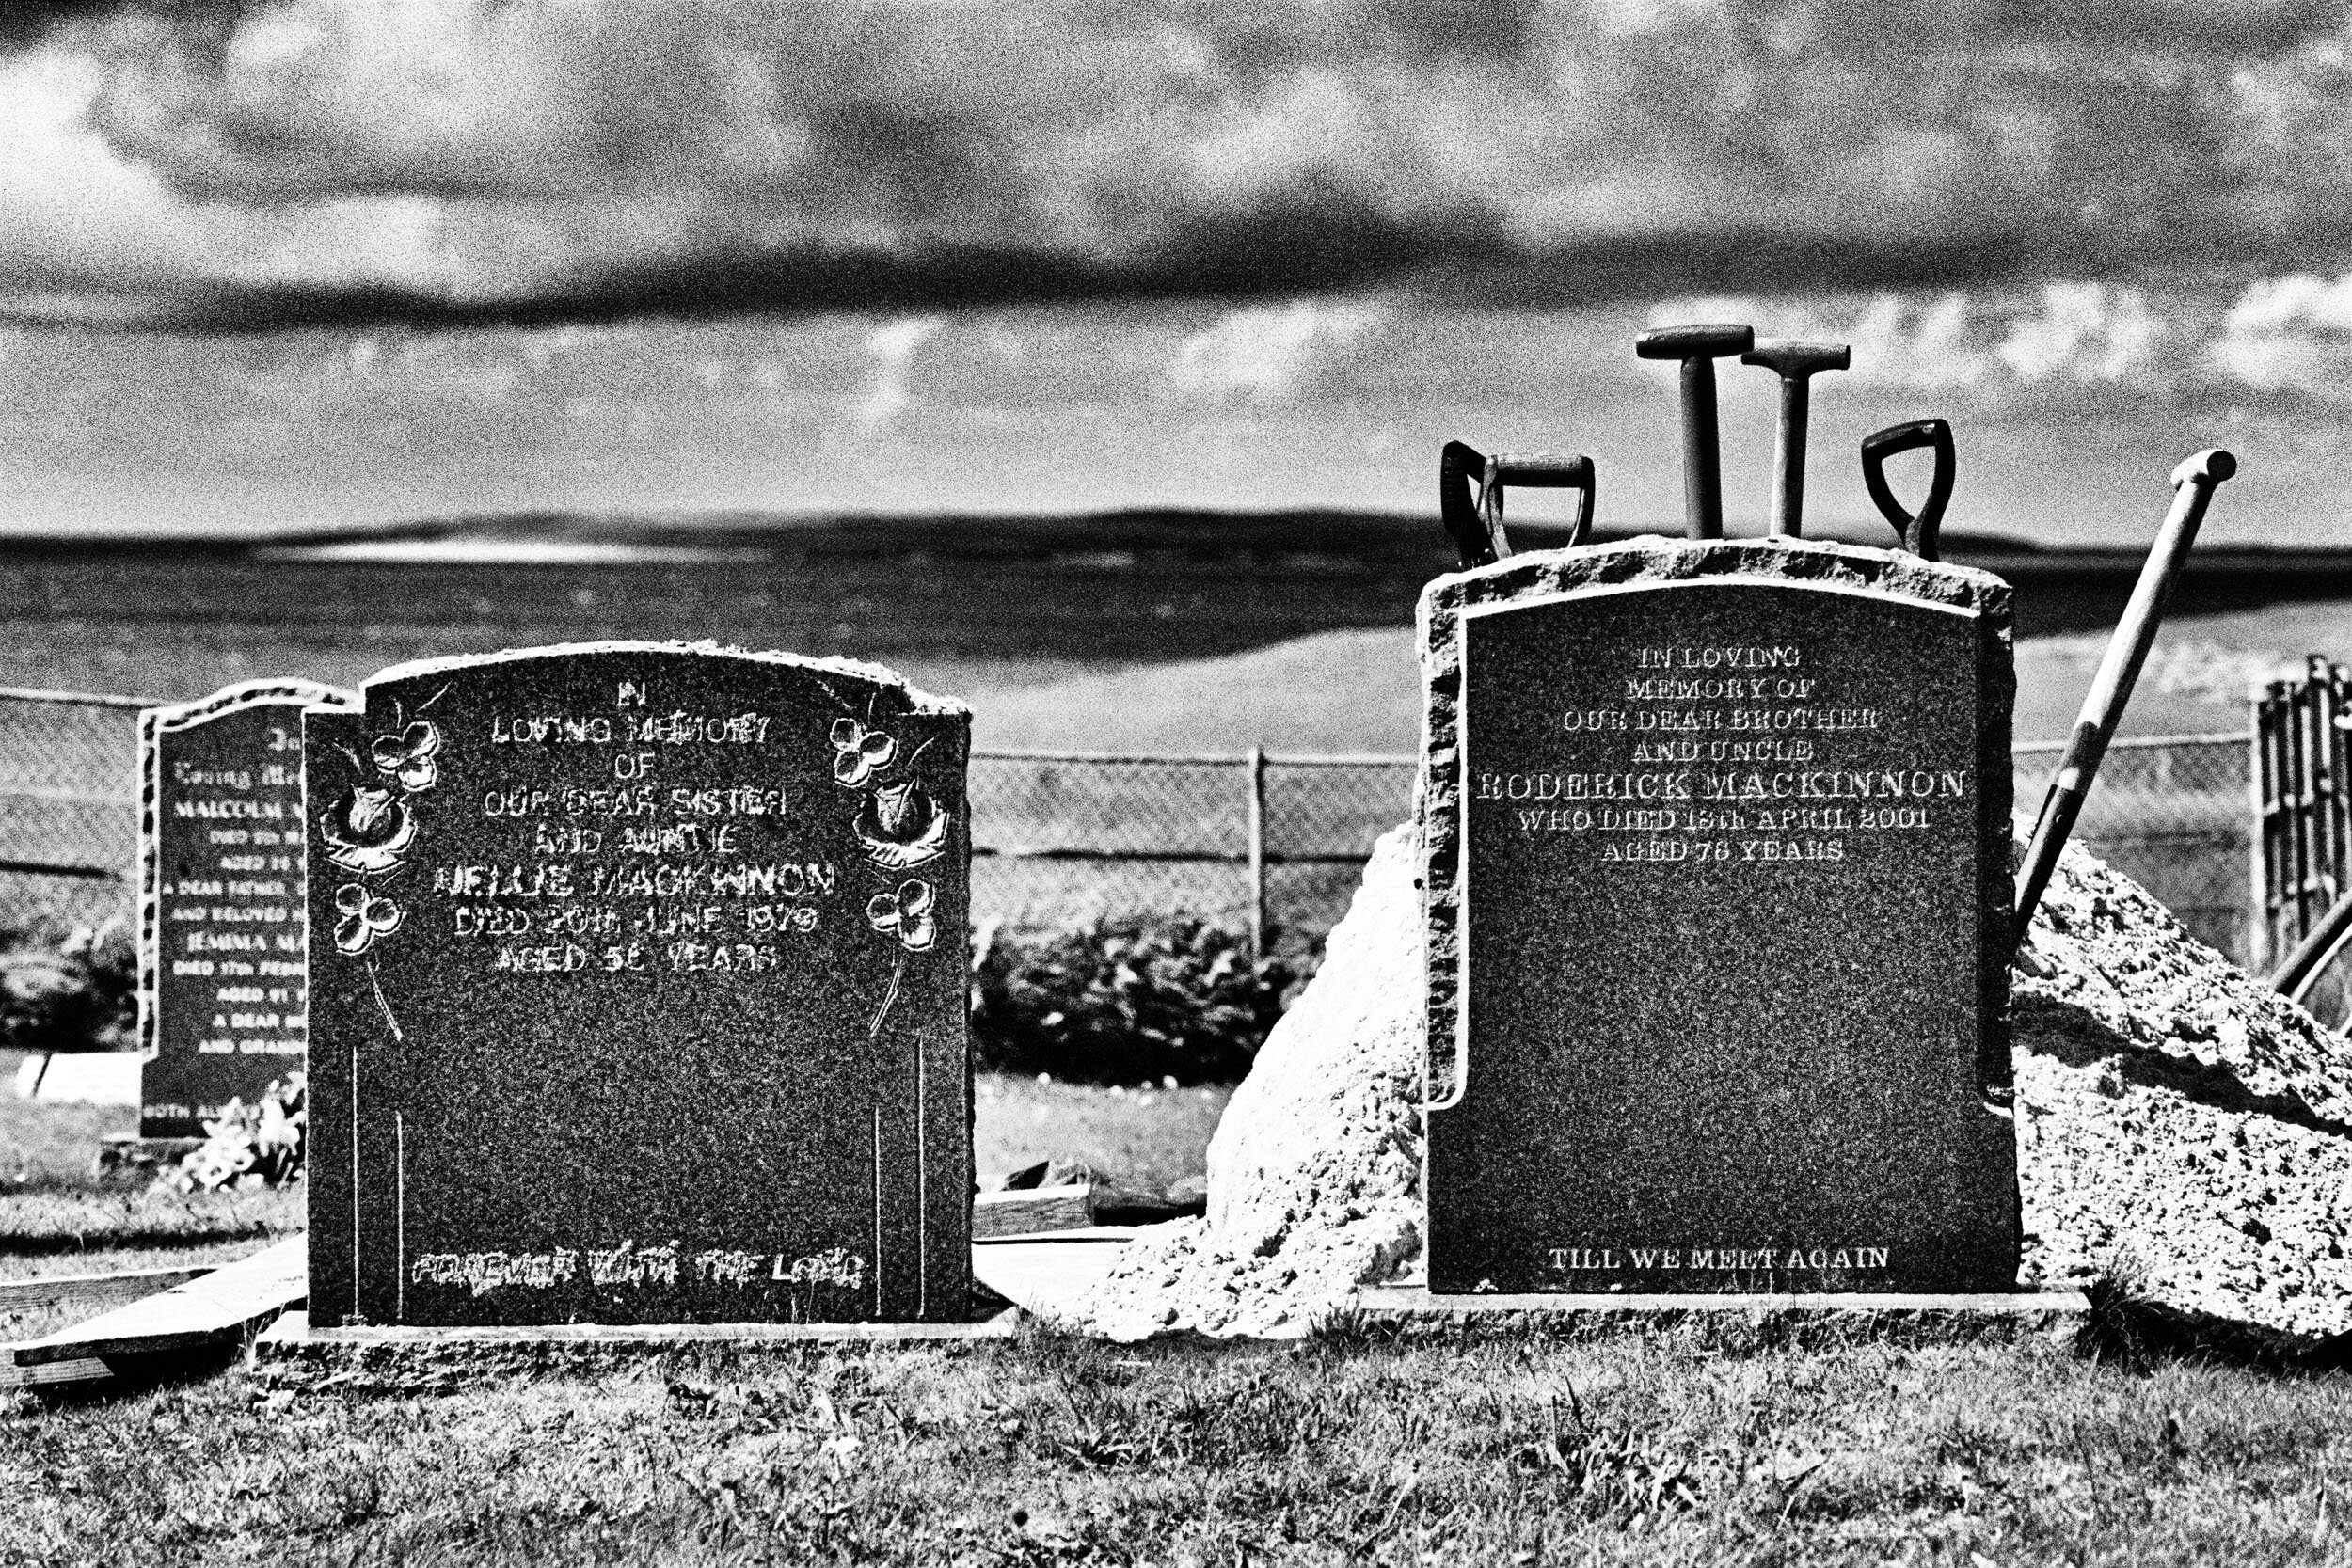  A Place to Rest, The New Cemetery, Isle of Berneray, 2018 